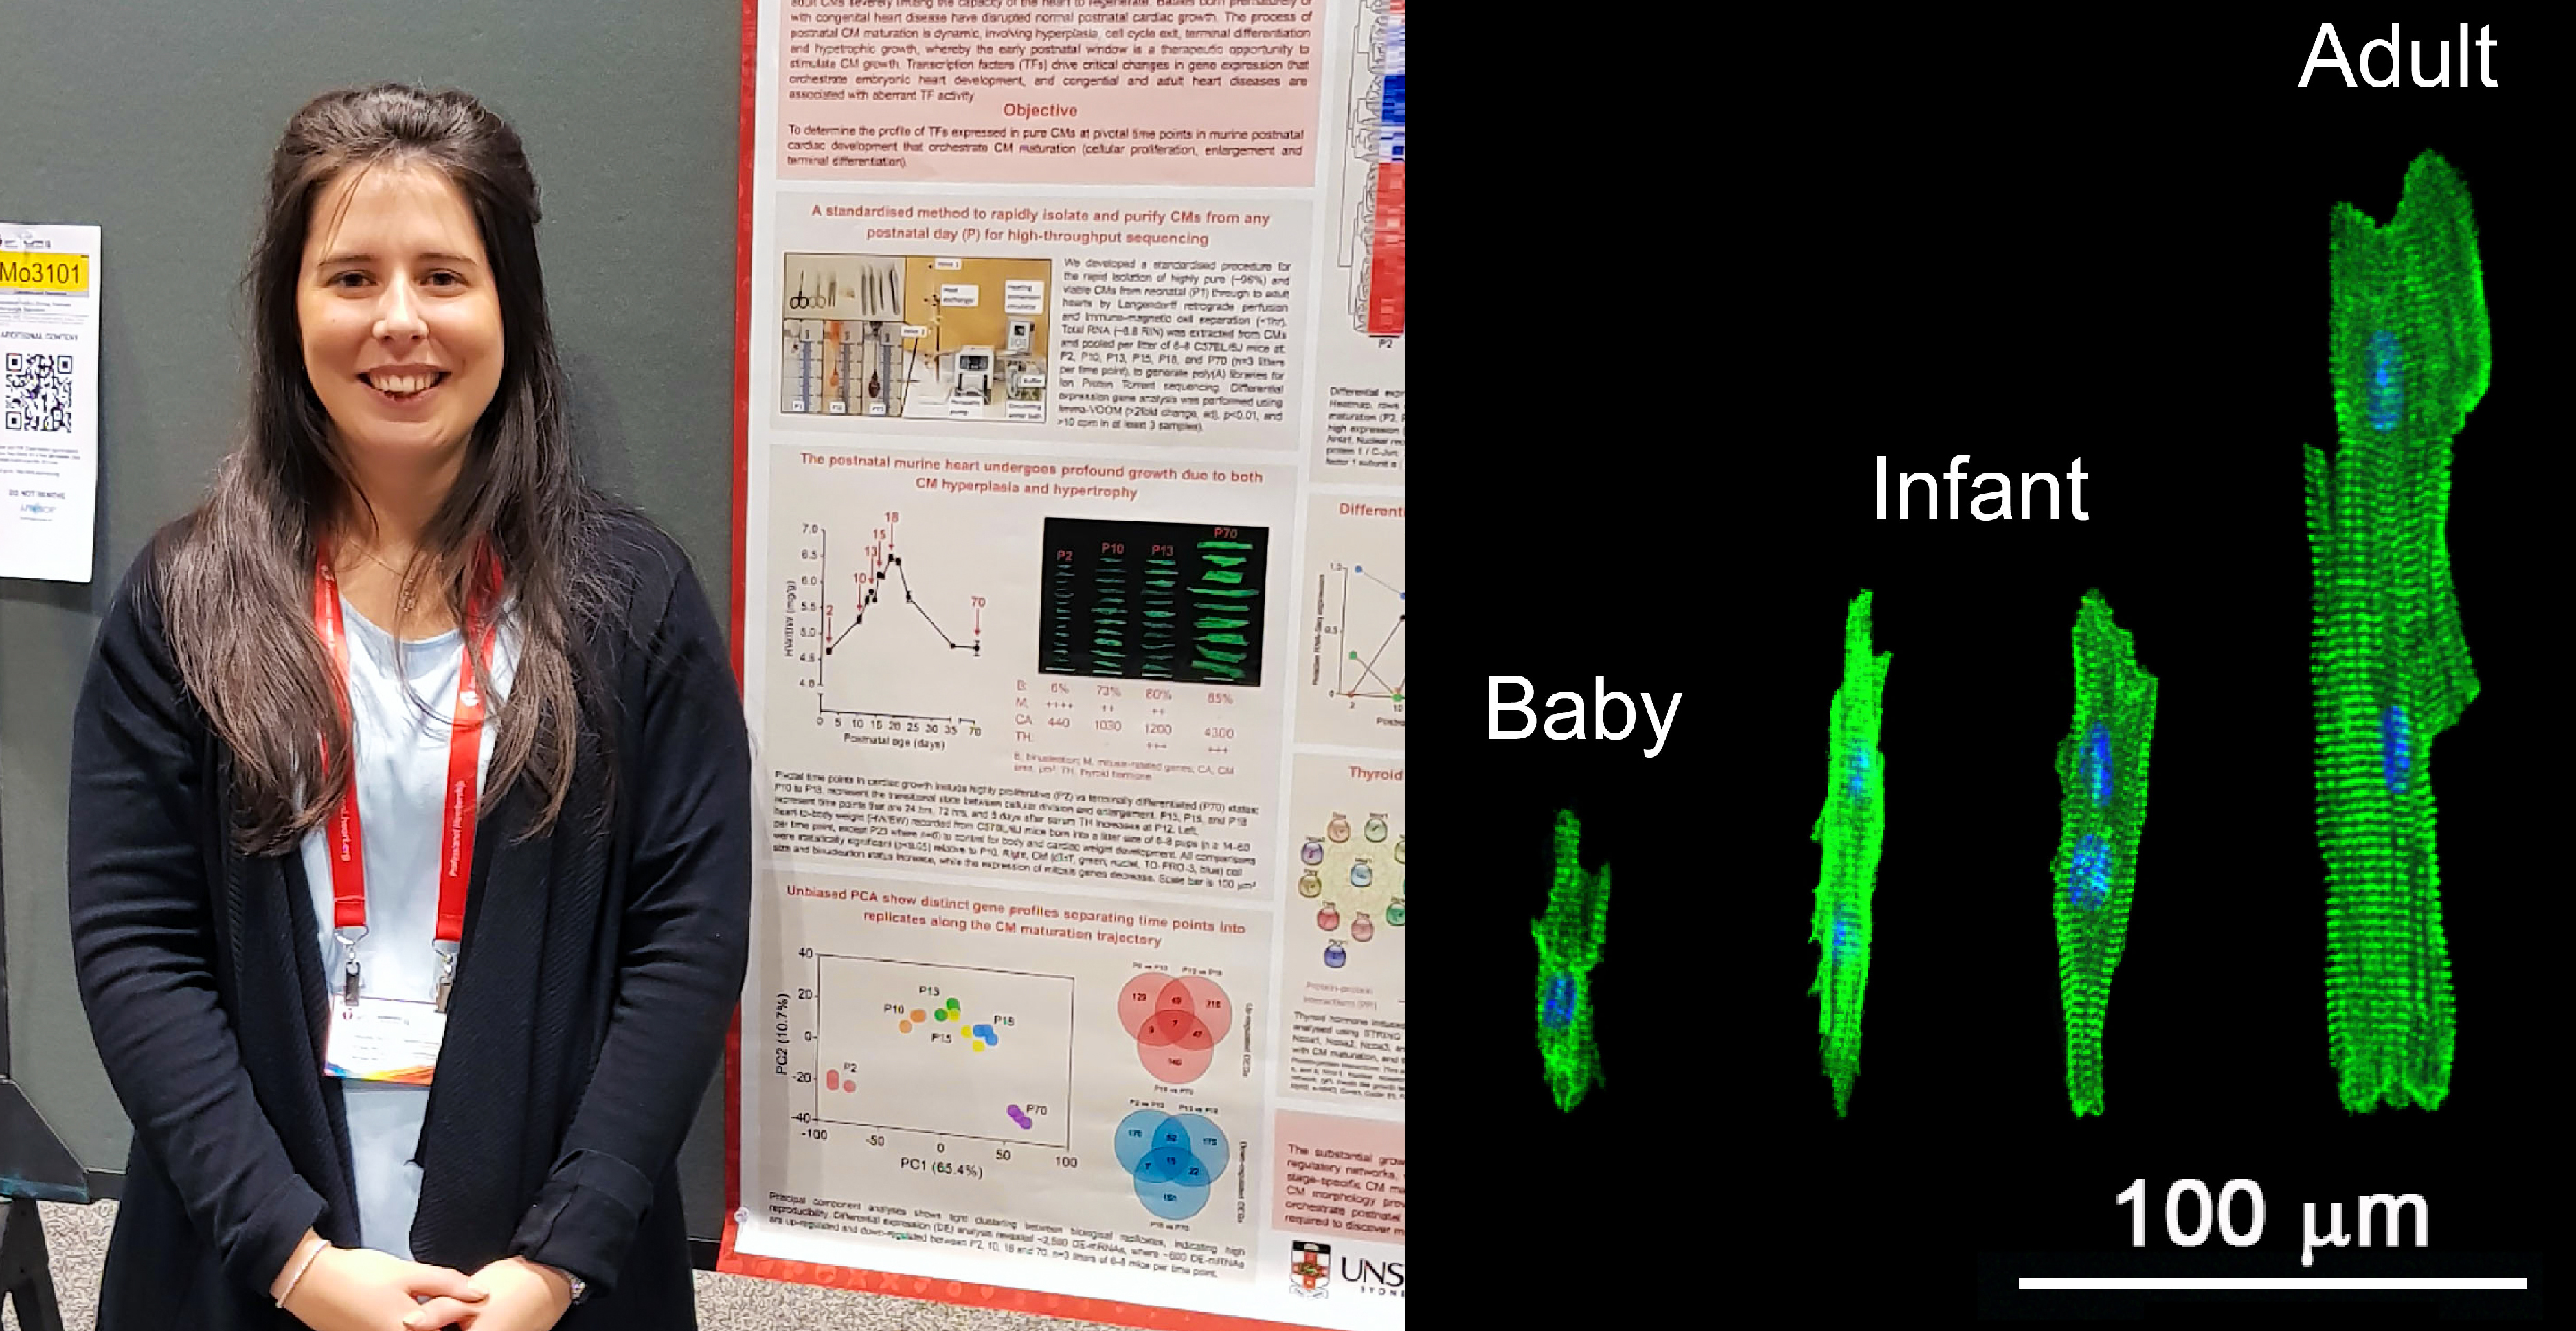 Dr Amy Nicks standing beside her research poster for AHA; Image of cardiomyocytes P2, 10, 13, and adult with labels.